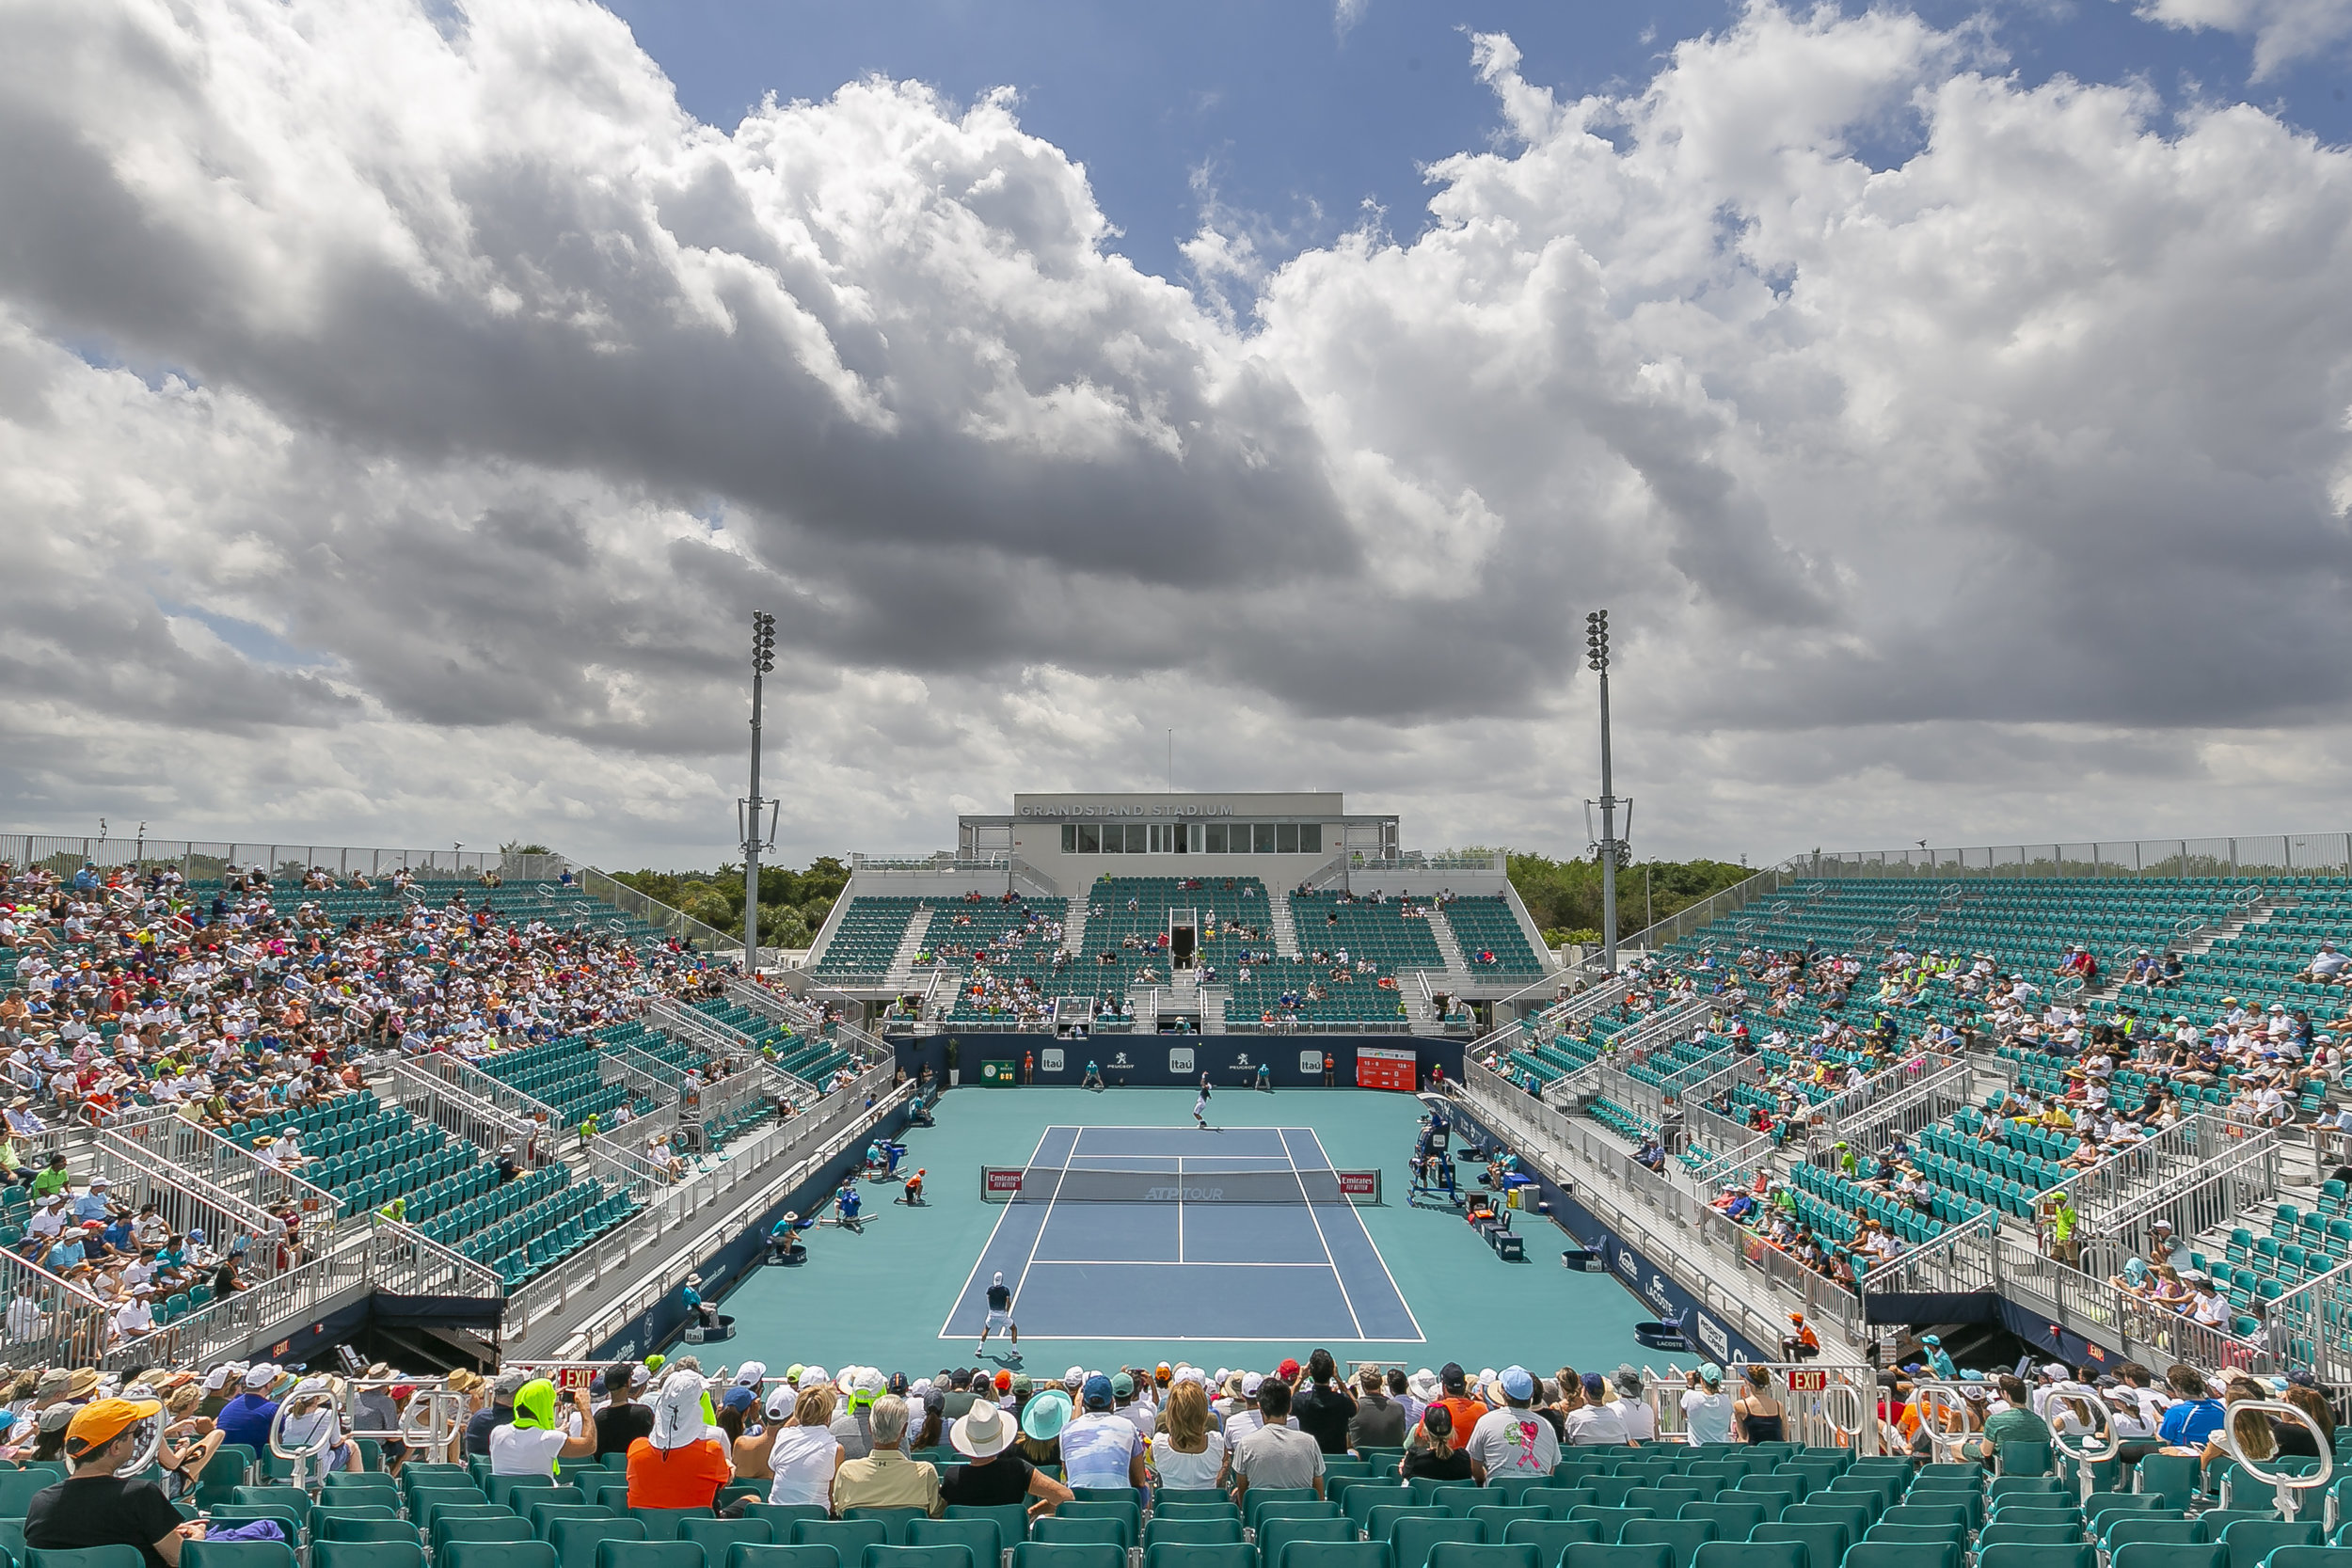  Attendees watch a match between Joao Sousa, of Portugal, and Kevin Anderson, of South Africa, during their match at the Miami Open tennis tournament on Monday, March 25, 2019 at Hard Rock Stadium in Miami Gardens. 